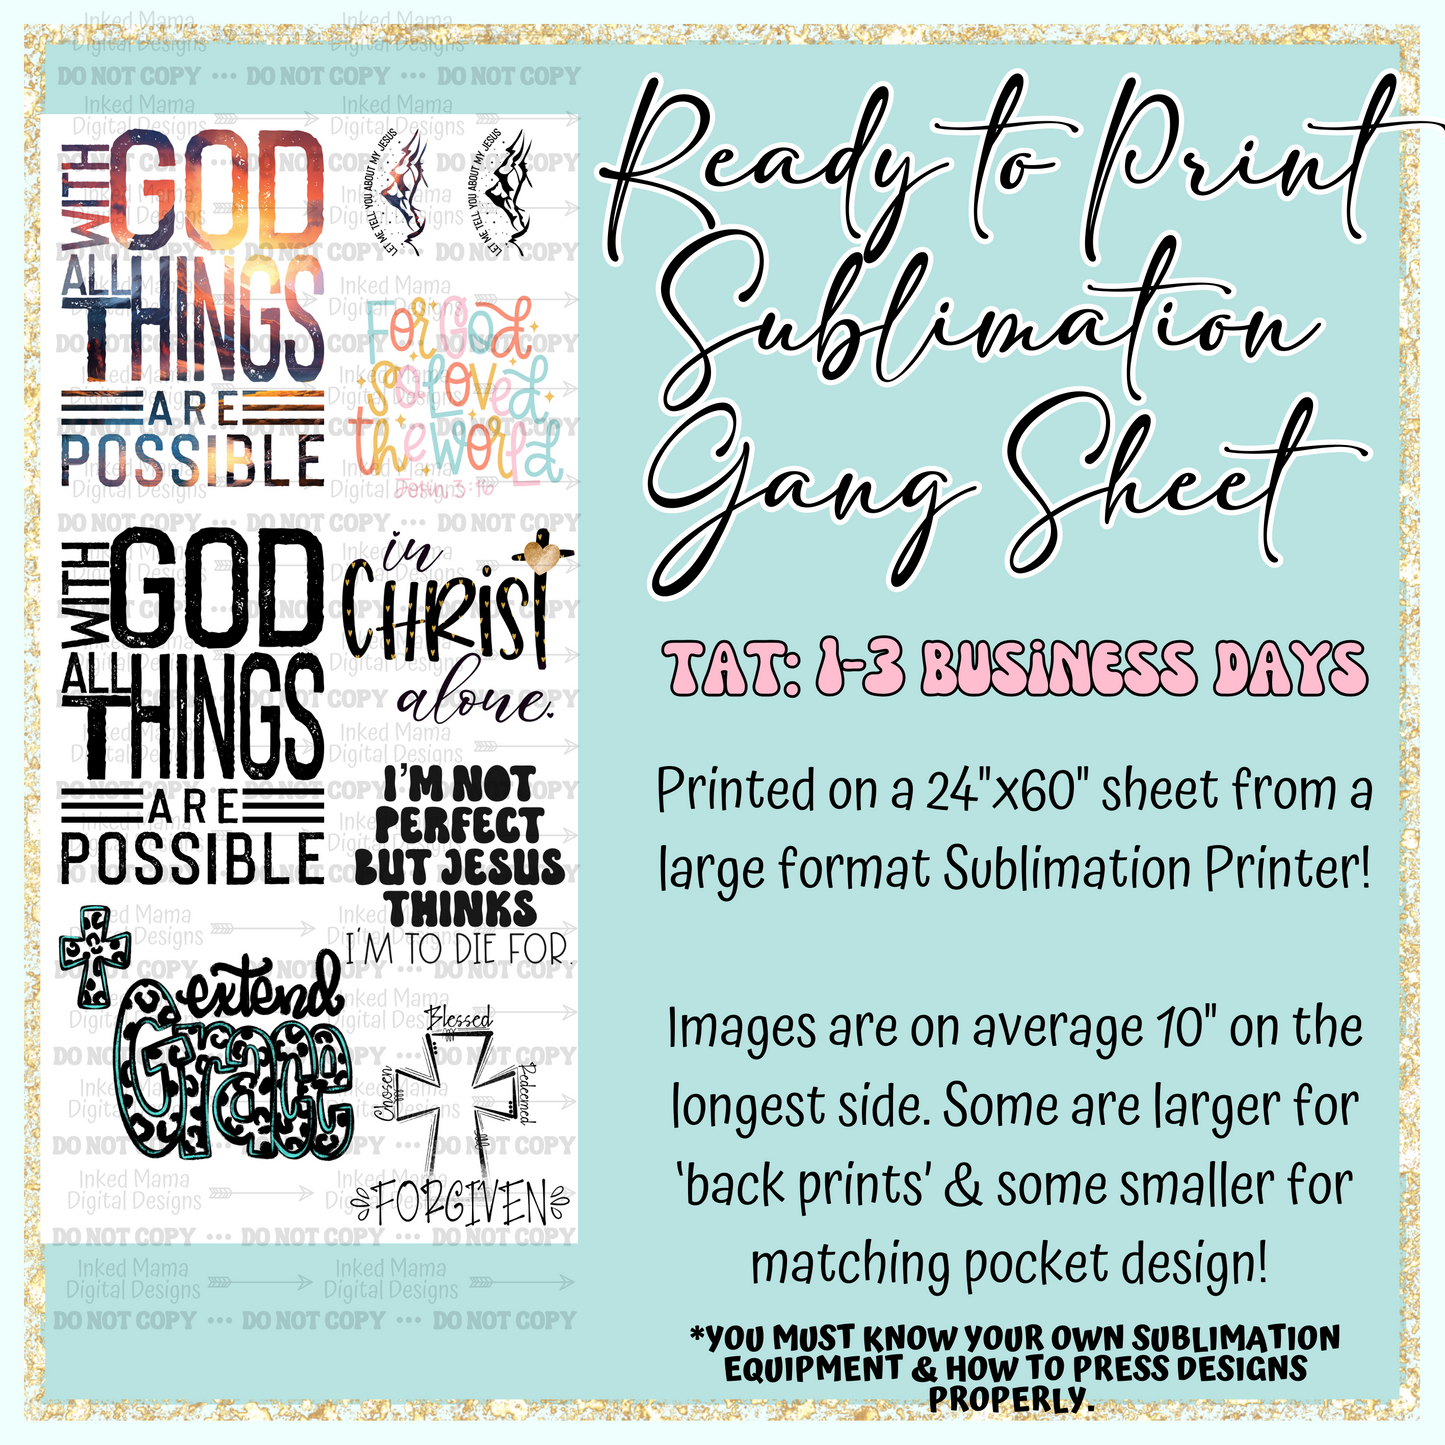 With God all things are possible | Faith | Ready to Print Sublimation Gang Sheet